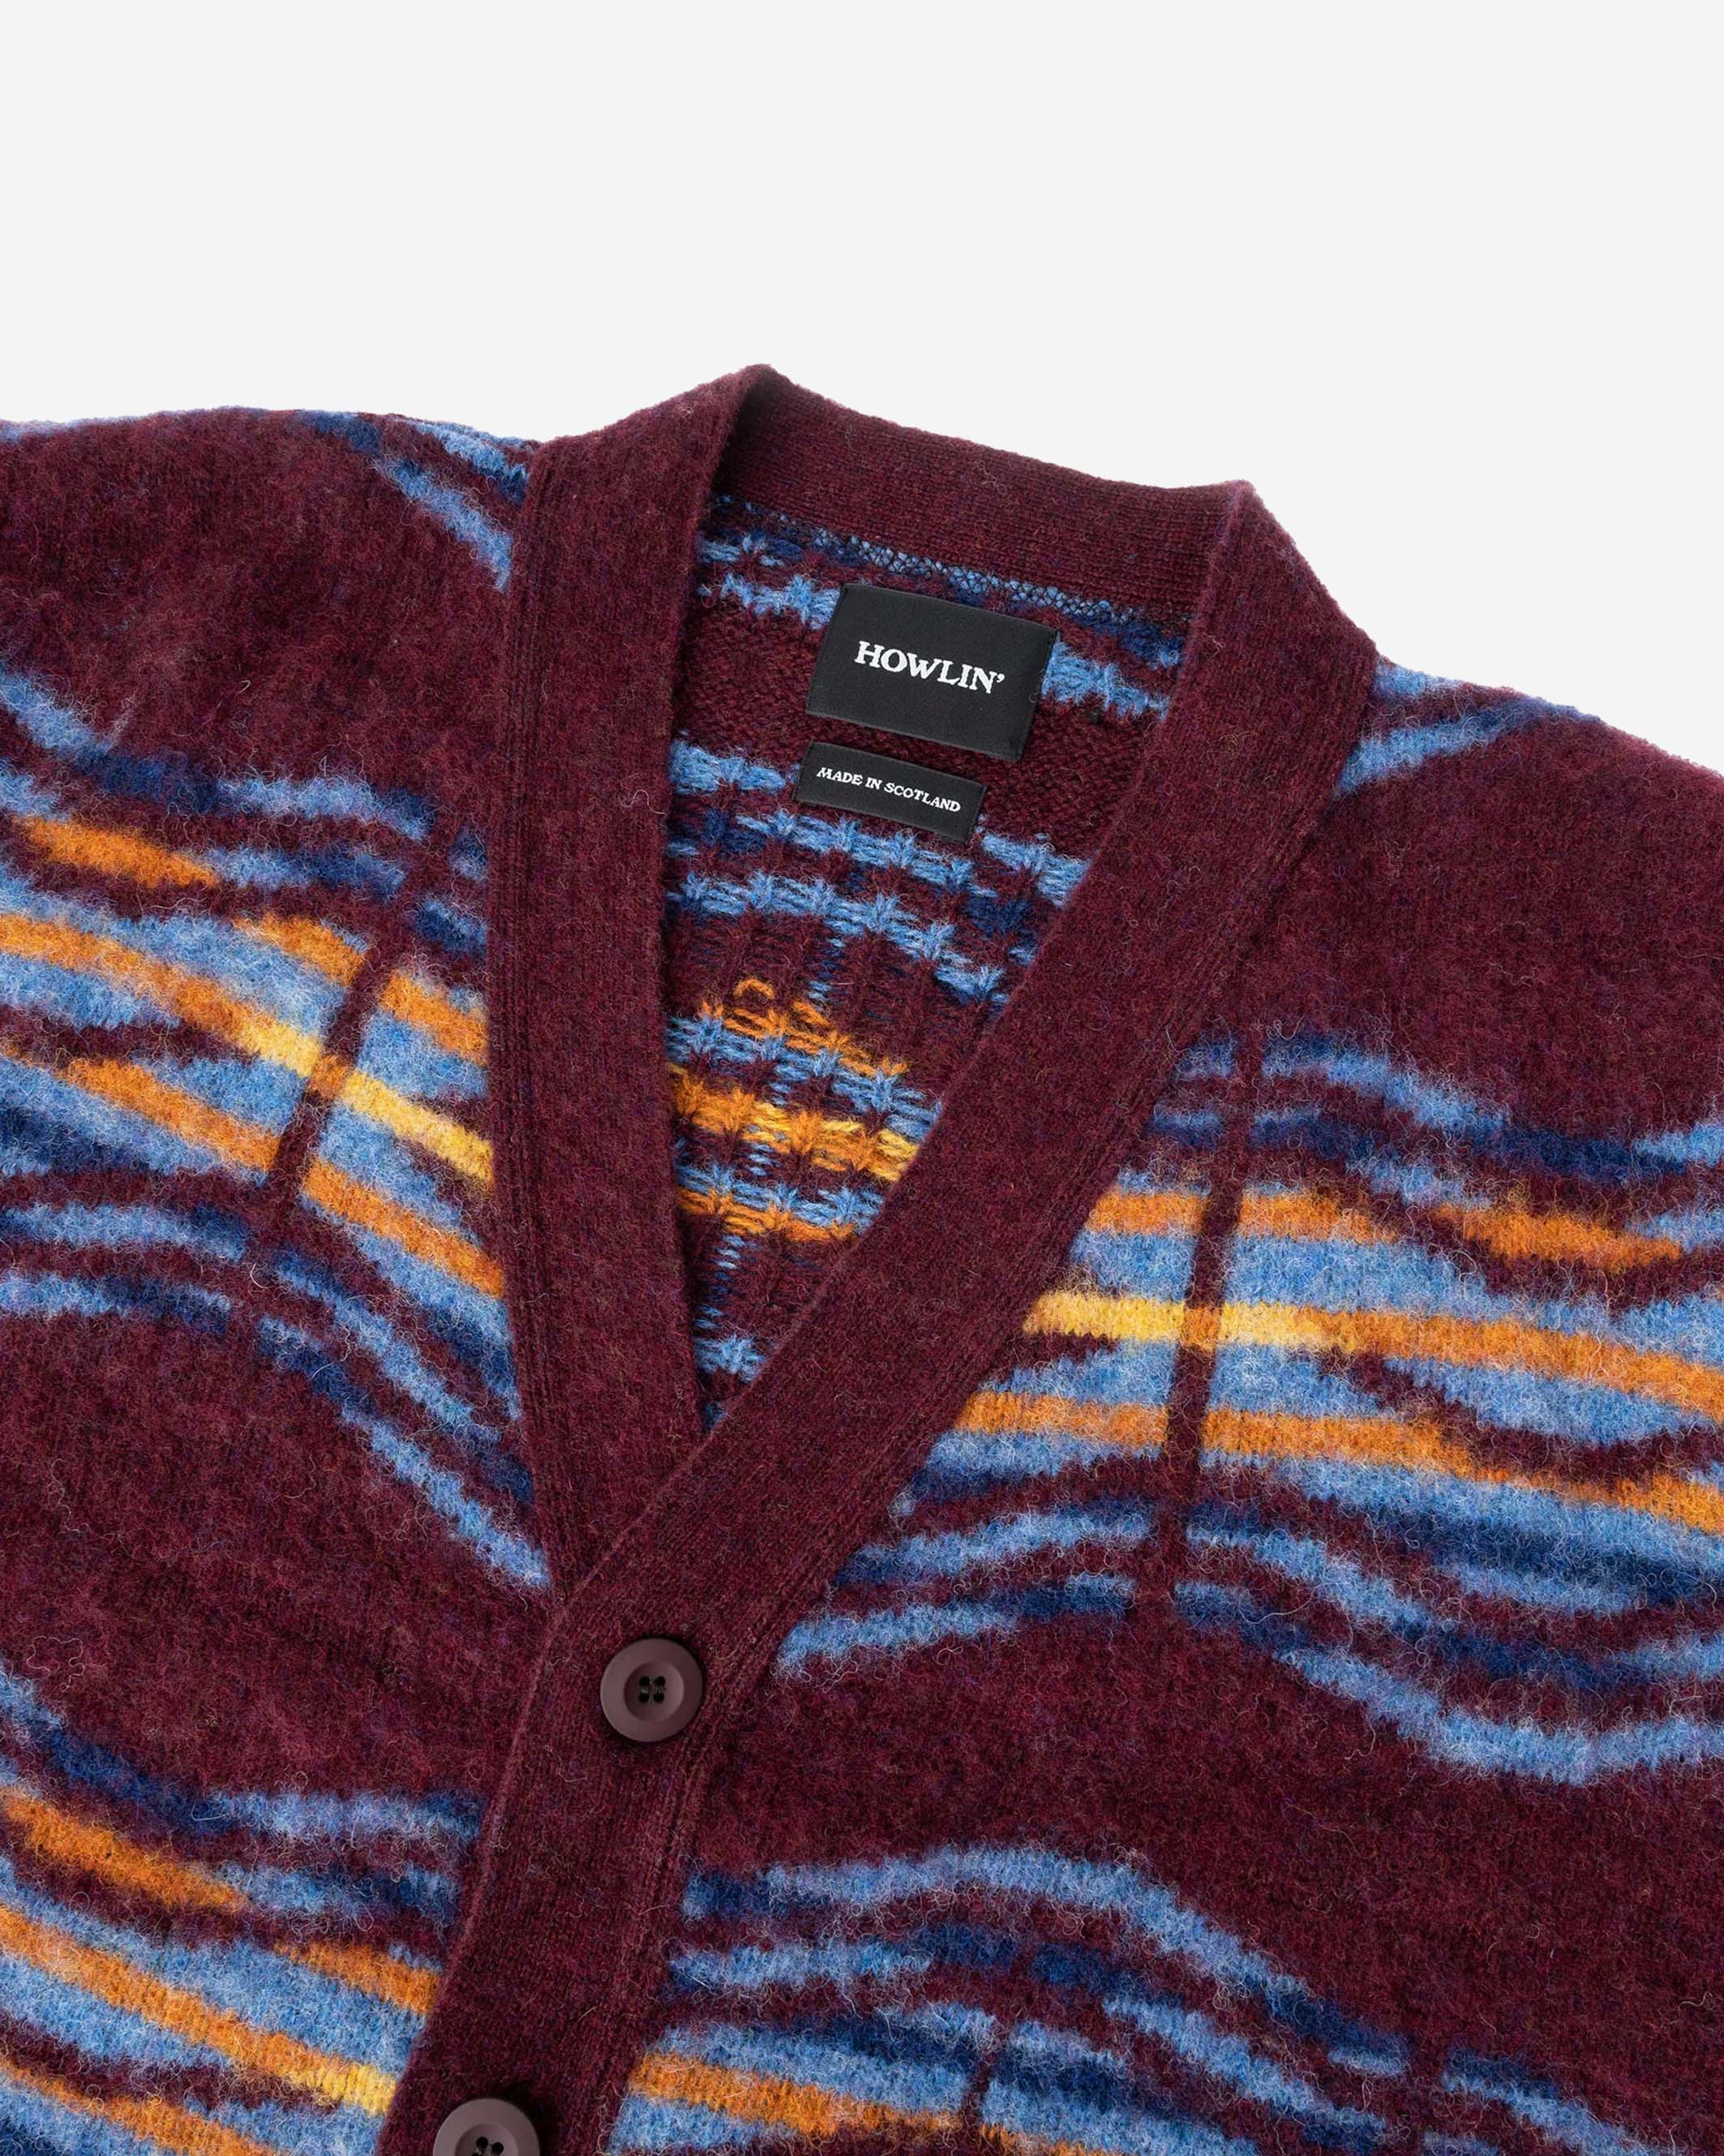 Out Of This World is a new seasonal highlight of Howlin's winter collection. Made out of 100% local Scottish wool. Fully knitted and hand finished in Scotland. Fits regularly.